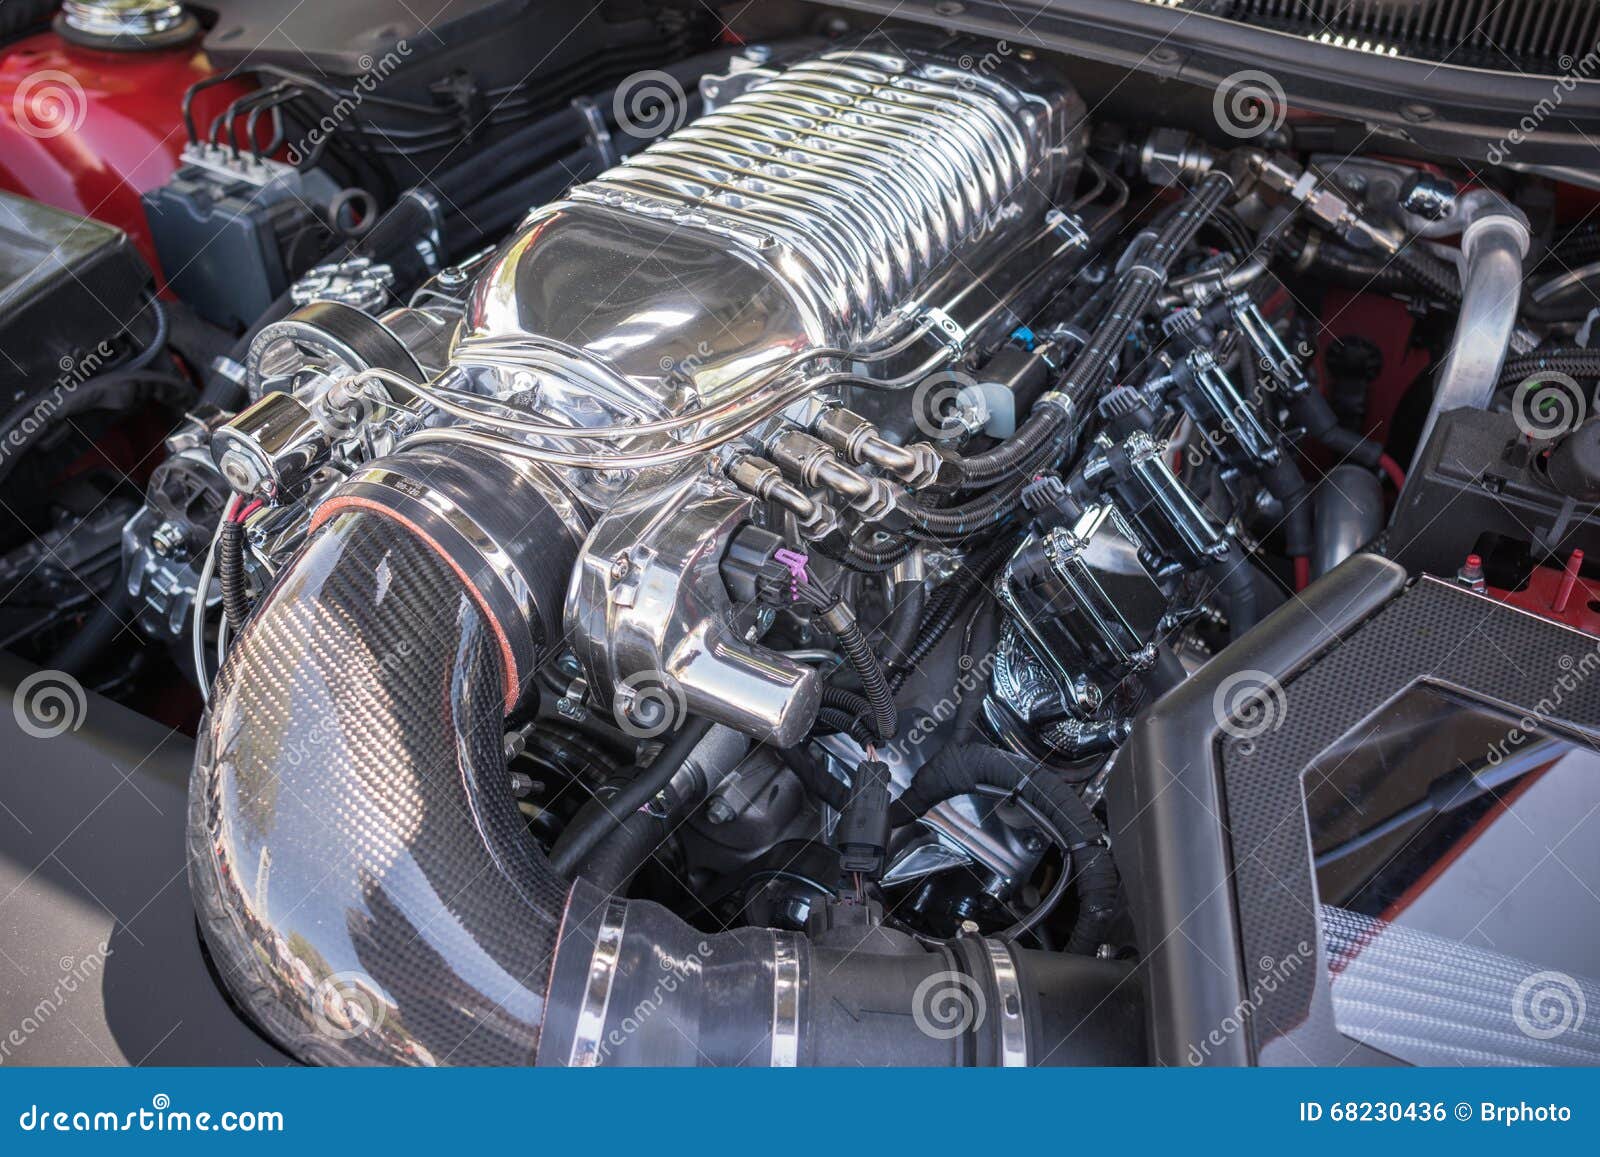 Customized Muscle Car Engine Displayed Editorial Photo - Image of